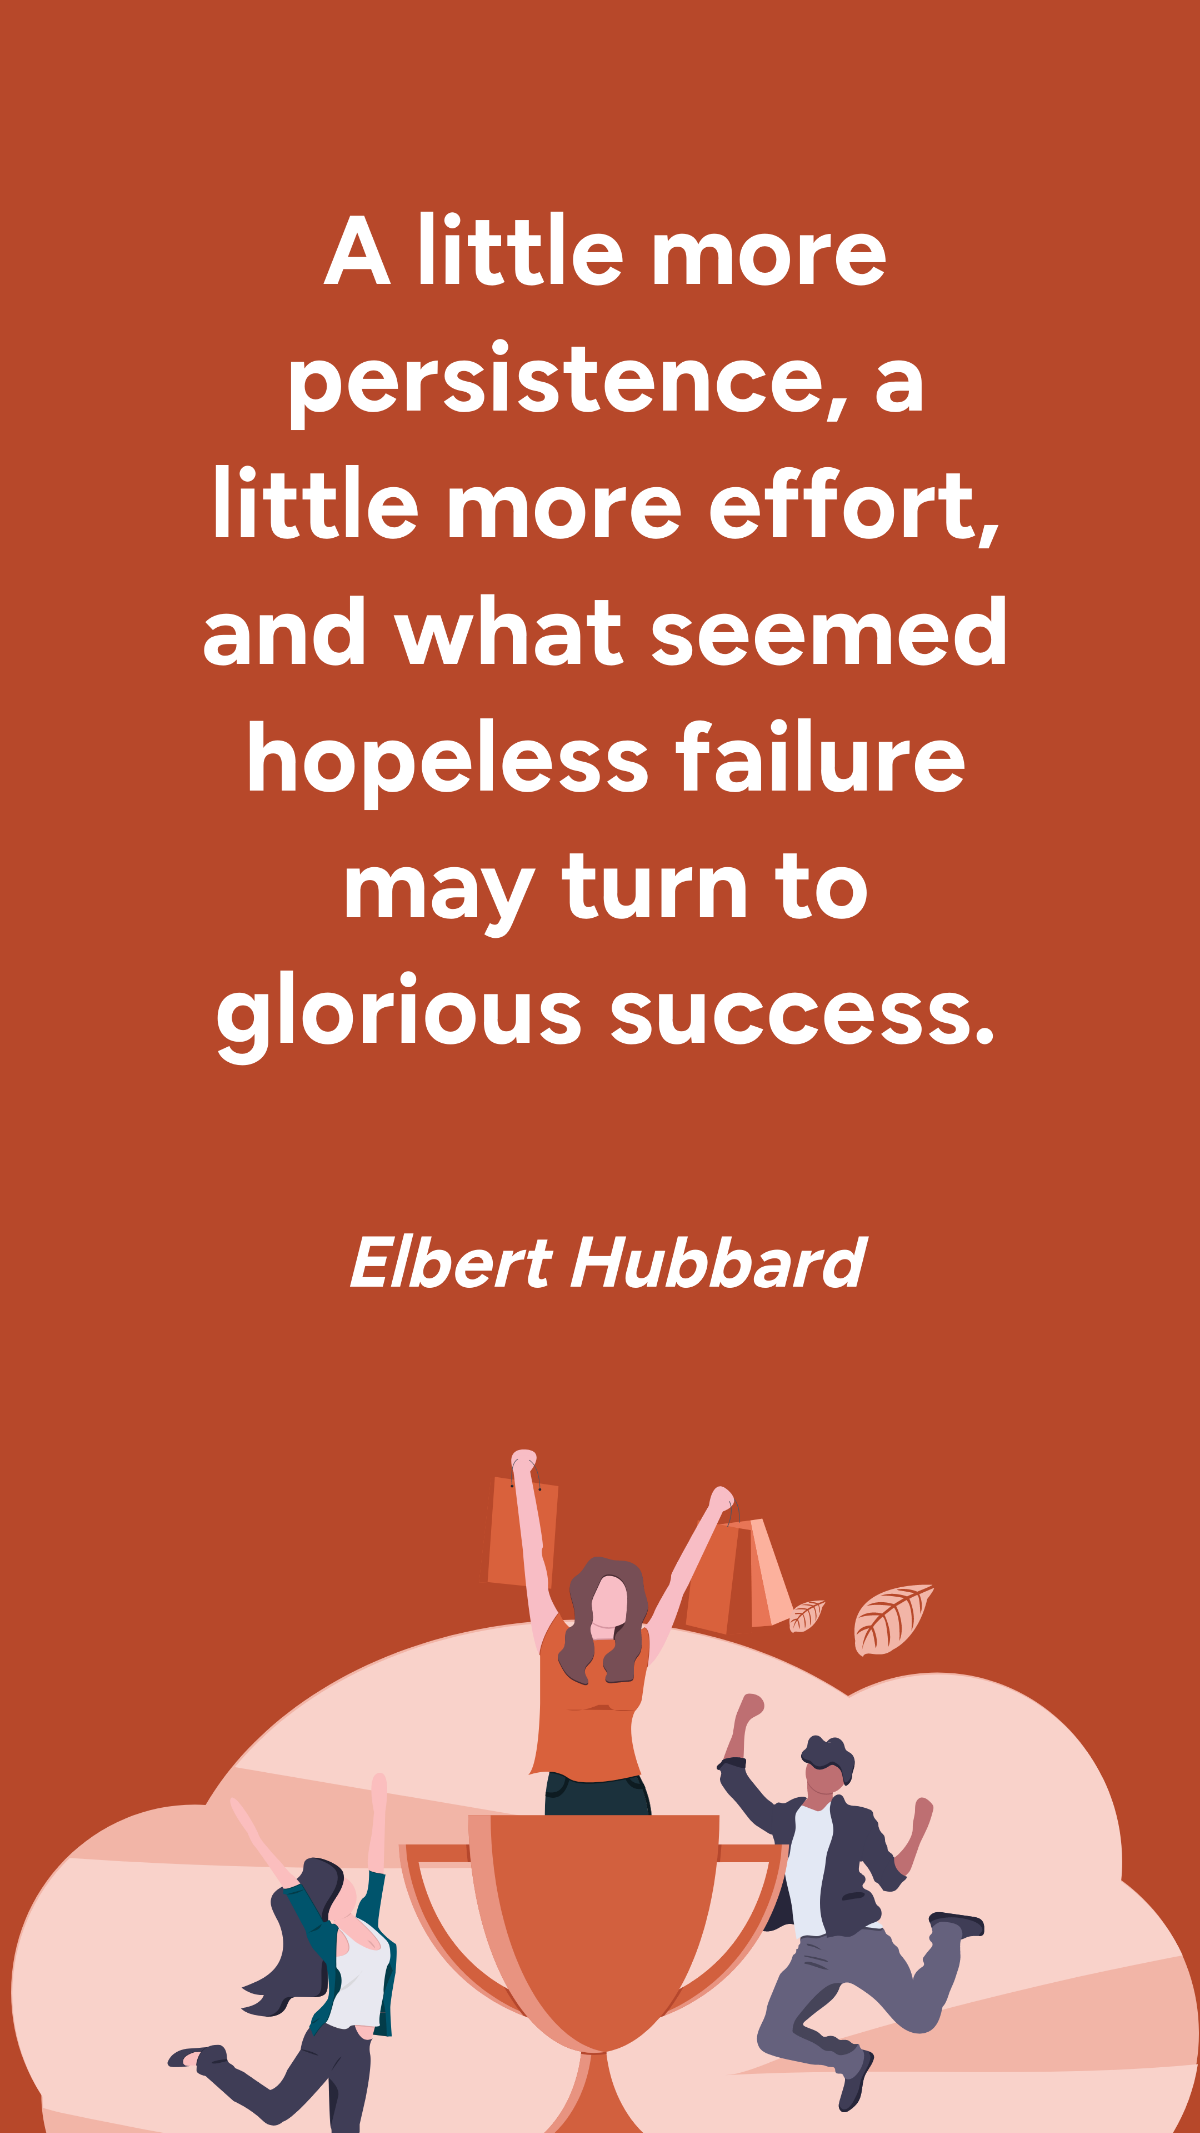 Free Elbert Hubbard - A little more persistence, a little more effort, and what seemed hopeless failure may turn to glorious success. Template